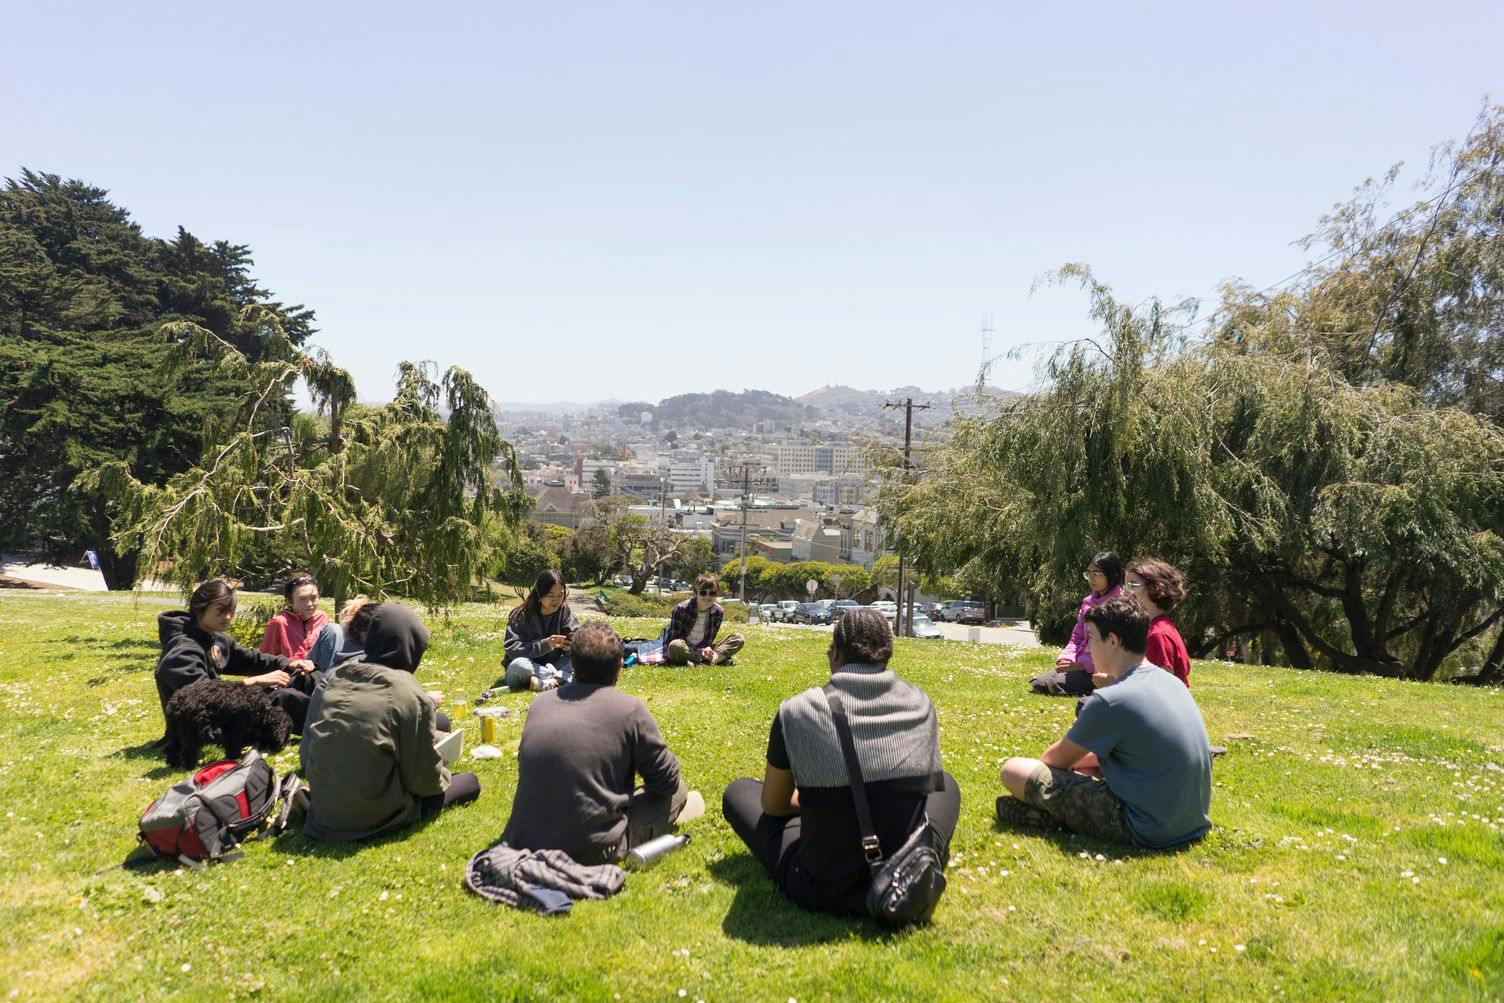 ATI San Francisco students sitting in a circle on grass having a discussion